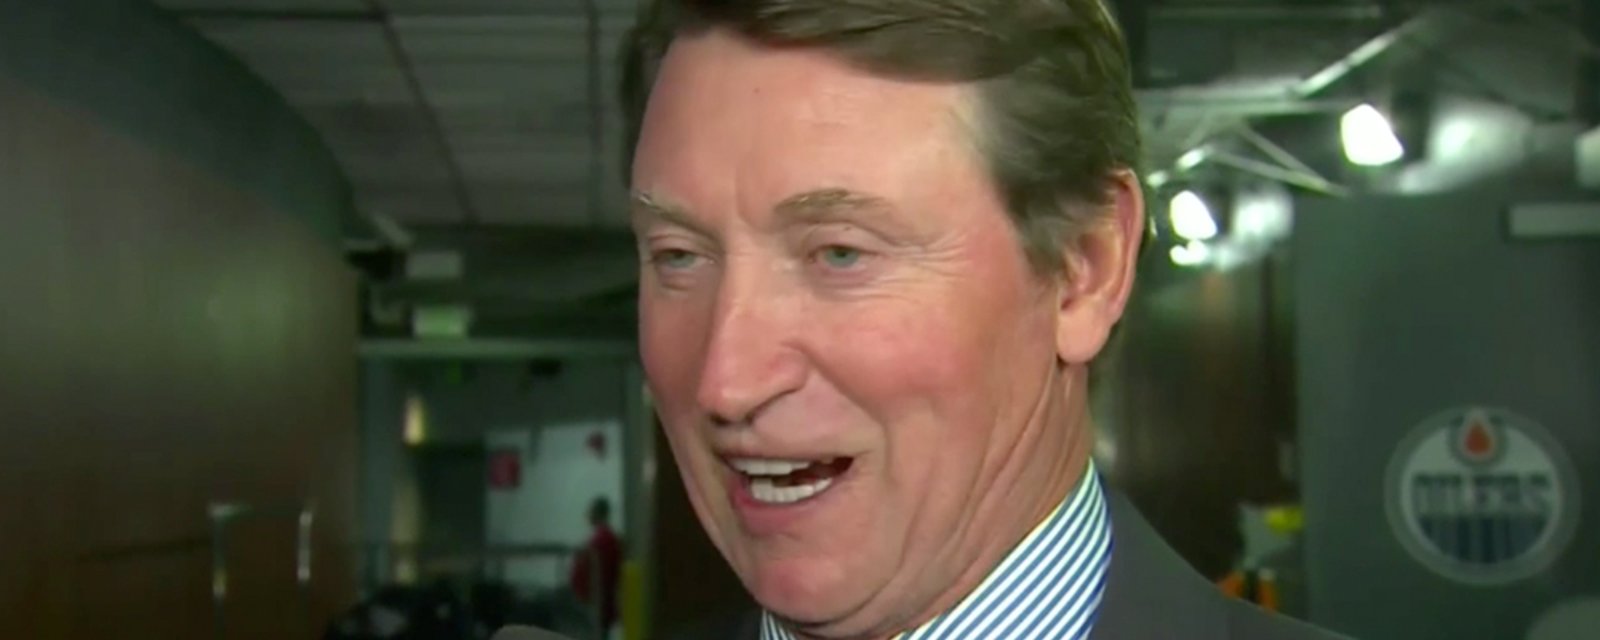 Must See: Oilers fans accuse Gretzky of giving boozy intermission interview 